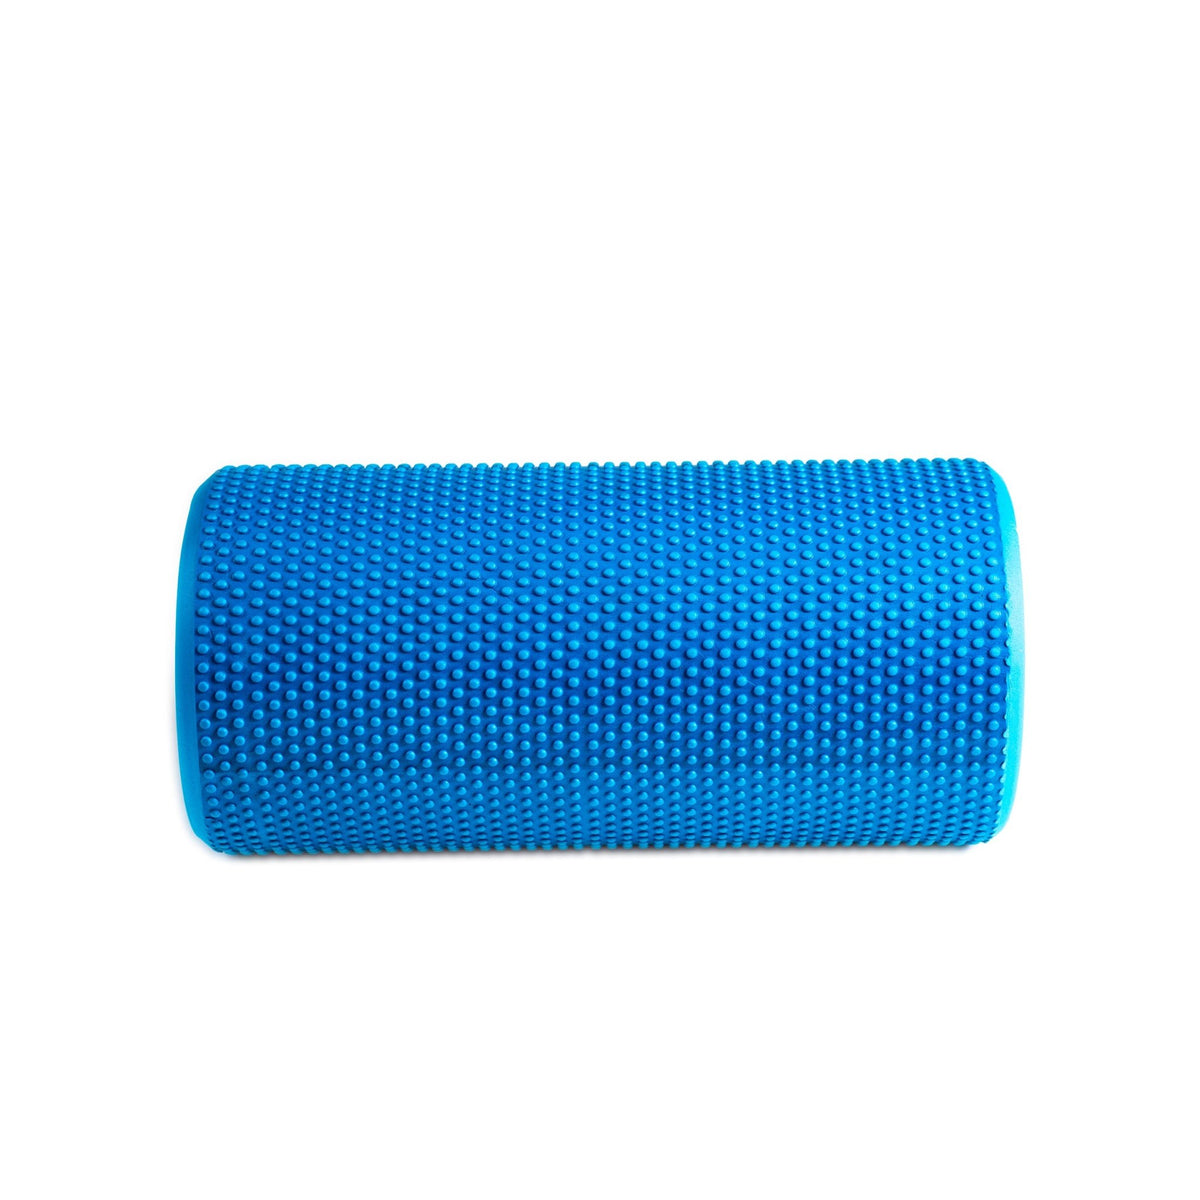 FitWay Equip. EVA FOAM ROLLERS - Fitness Experience